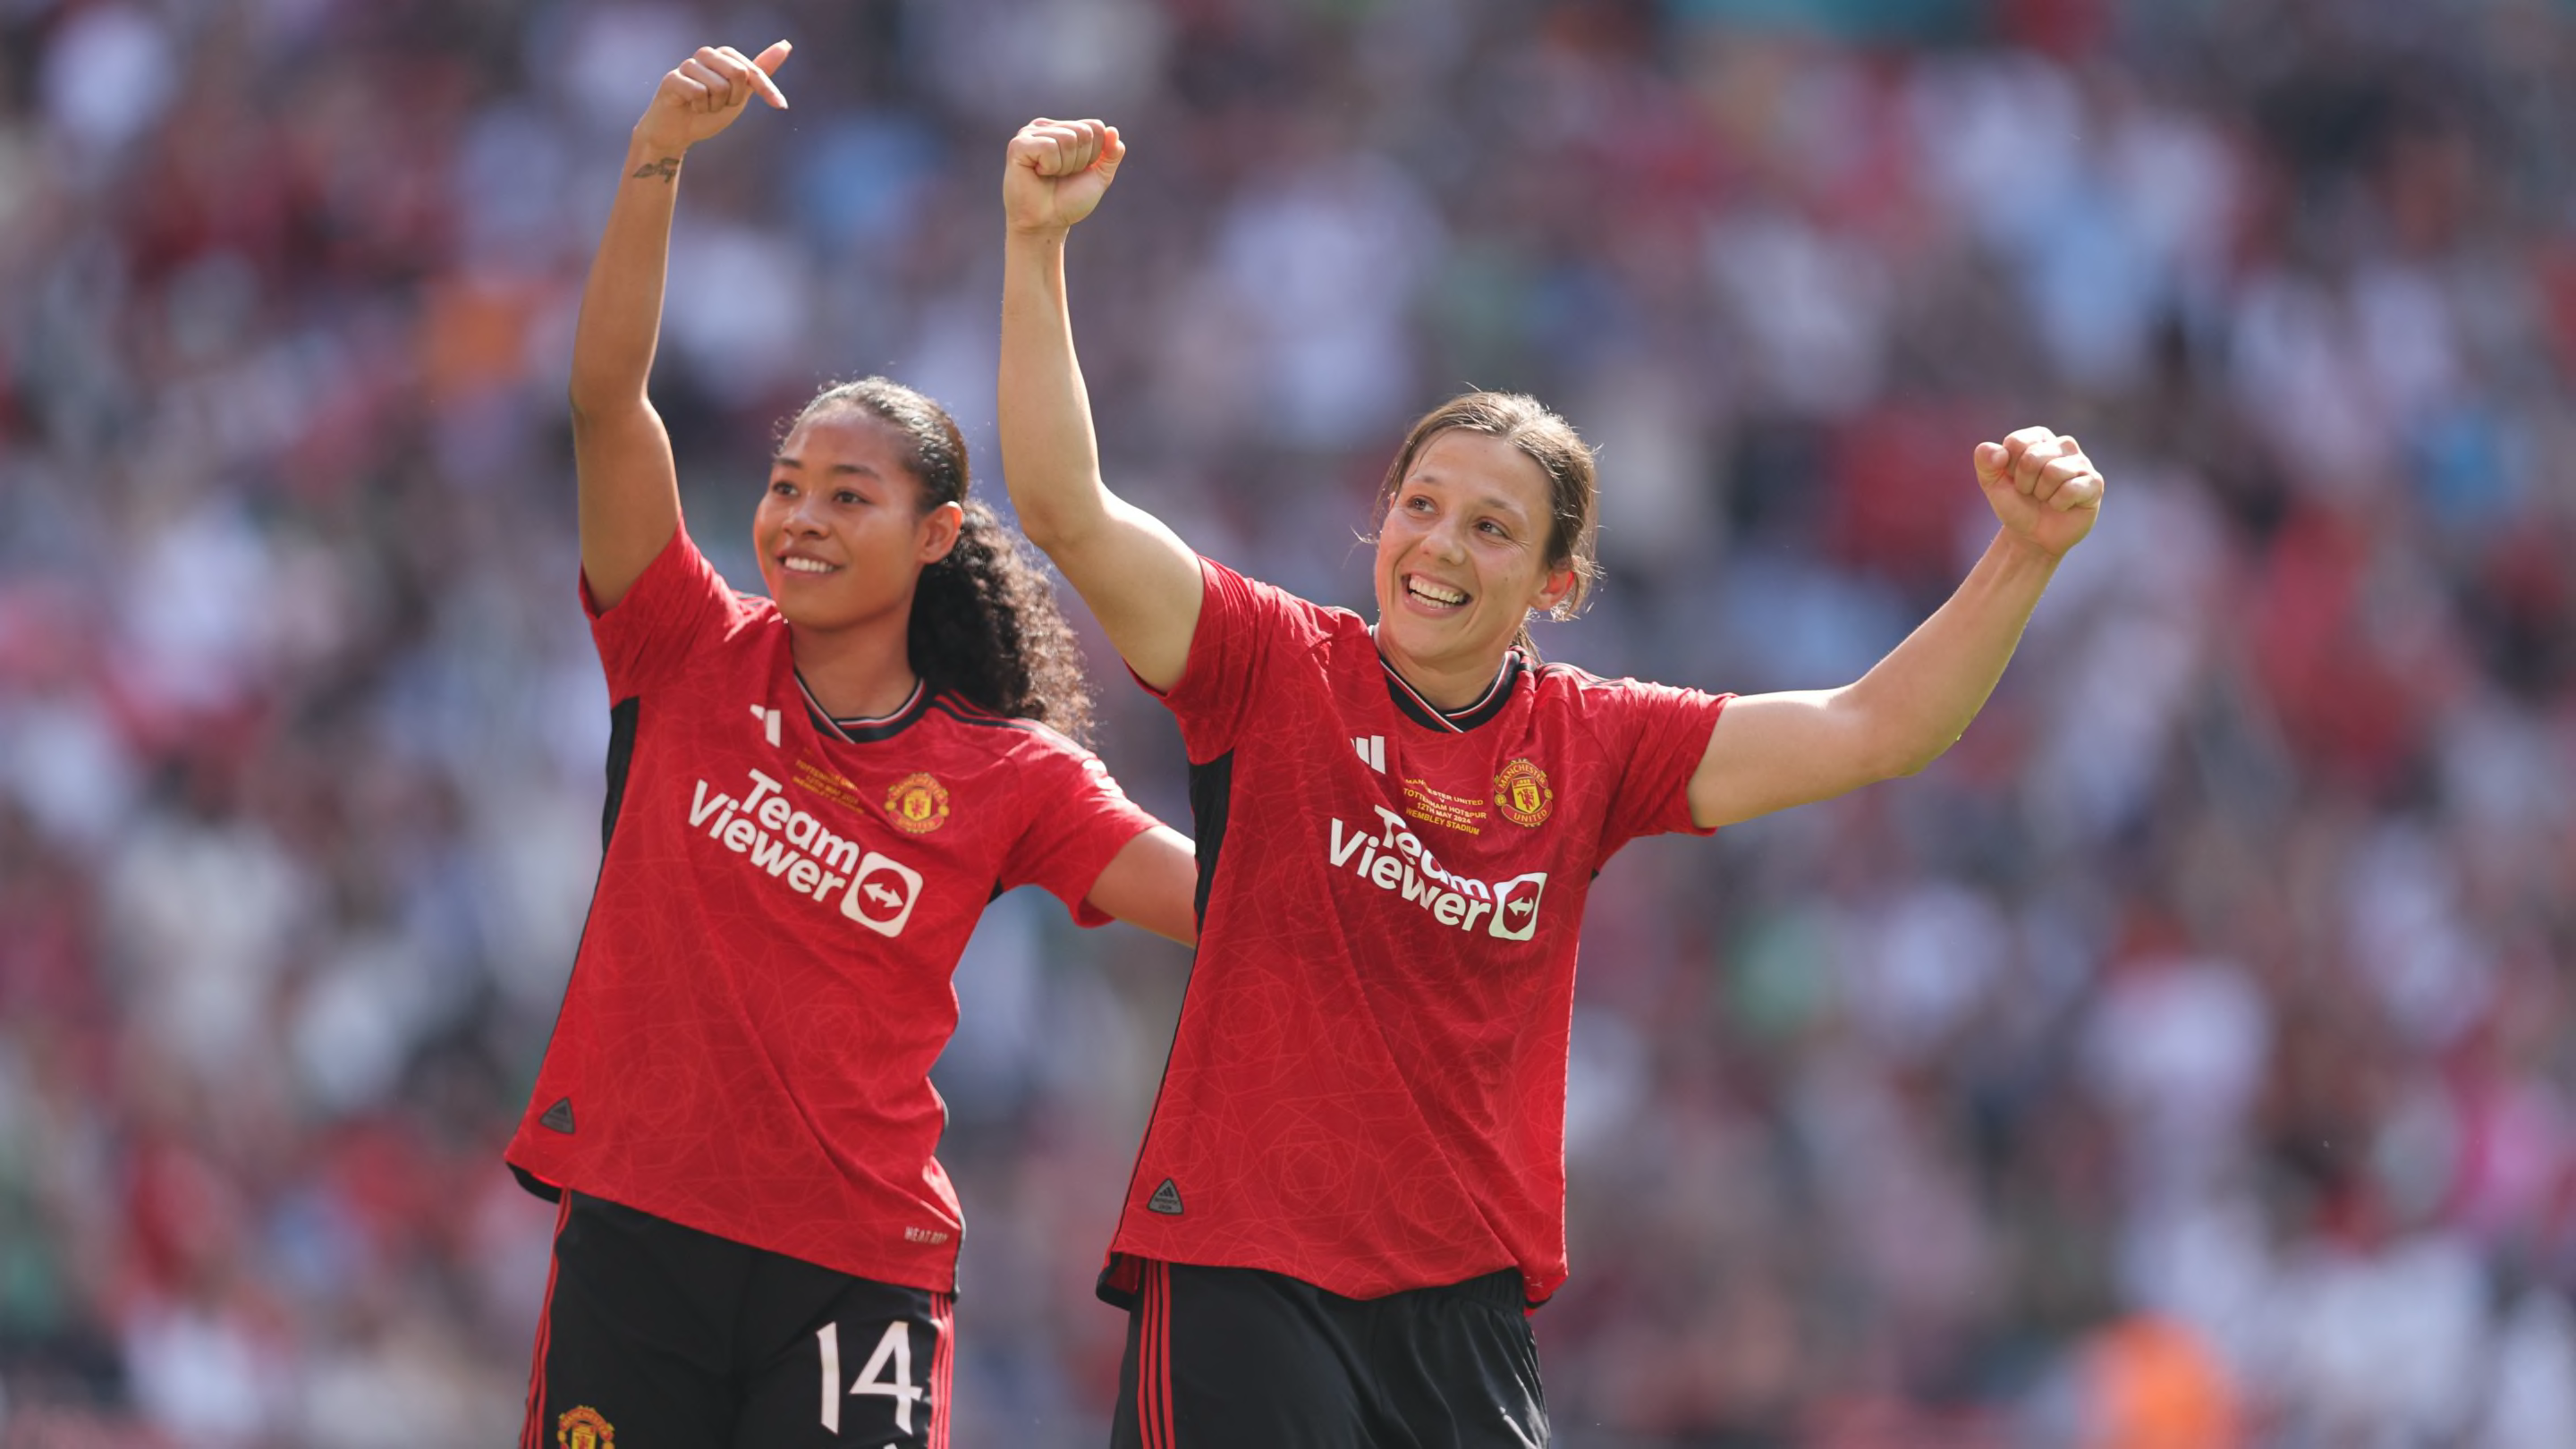 Man Utd claim first ever Women's FA Cup with thumping win over Tottenham